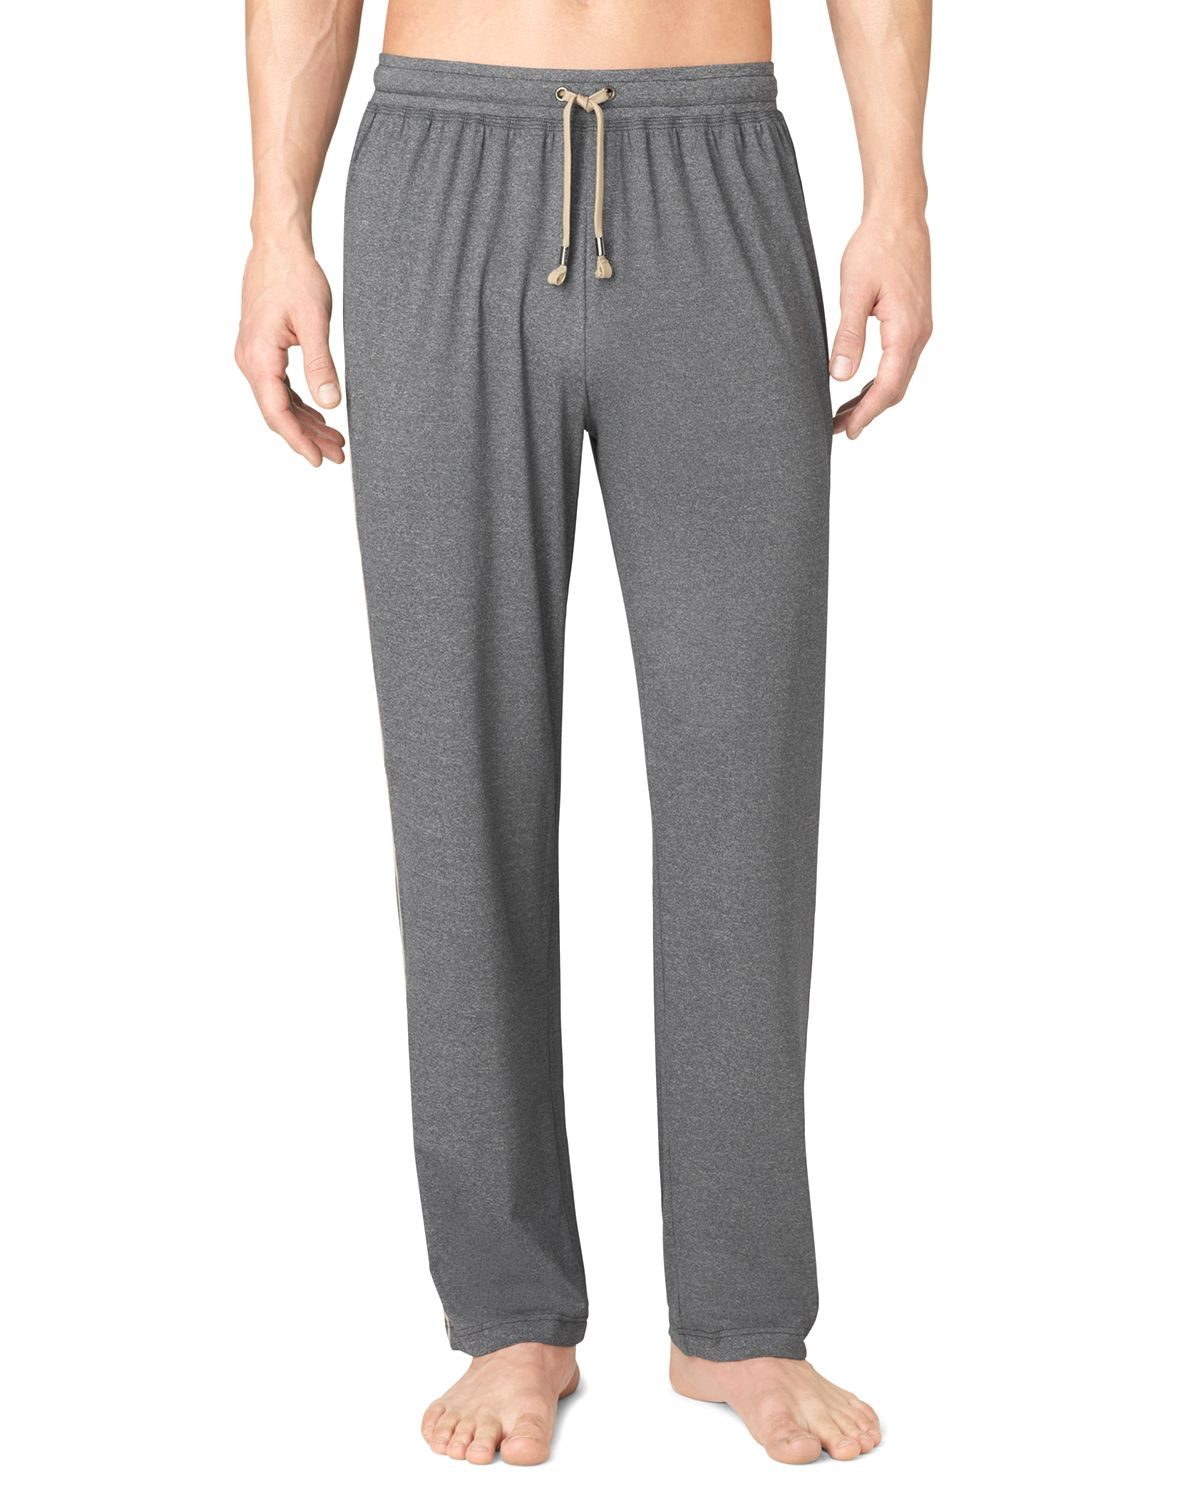 Calvin Klein Yoga Lounge Pants in Charcoal Heather (Gray) for Men - Lyst